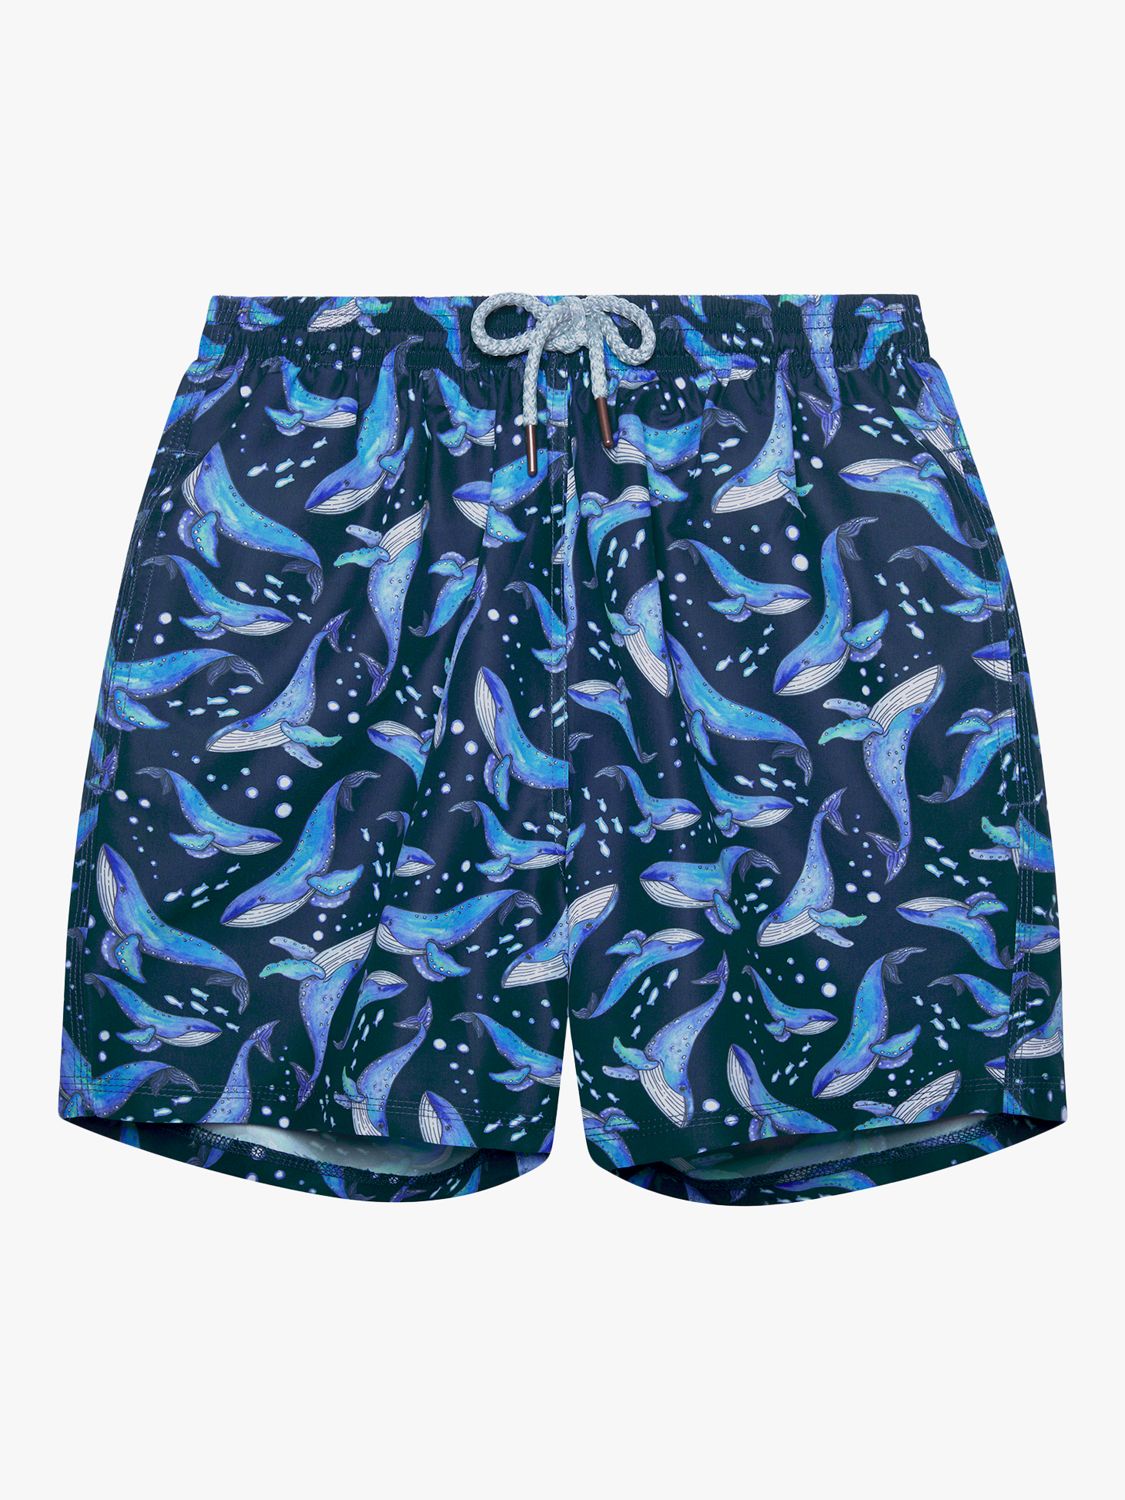 Trotters Whale Swim Shorts, Navy/Whale at John Lewis & Partners